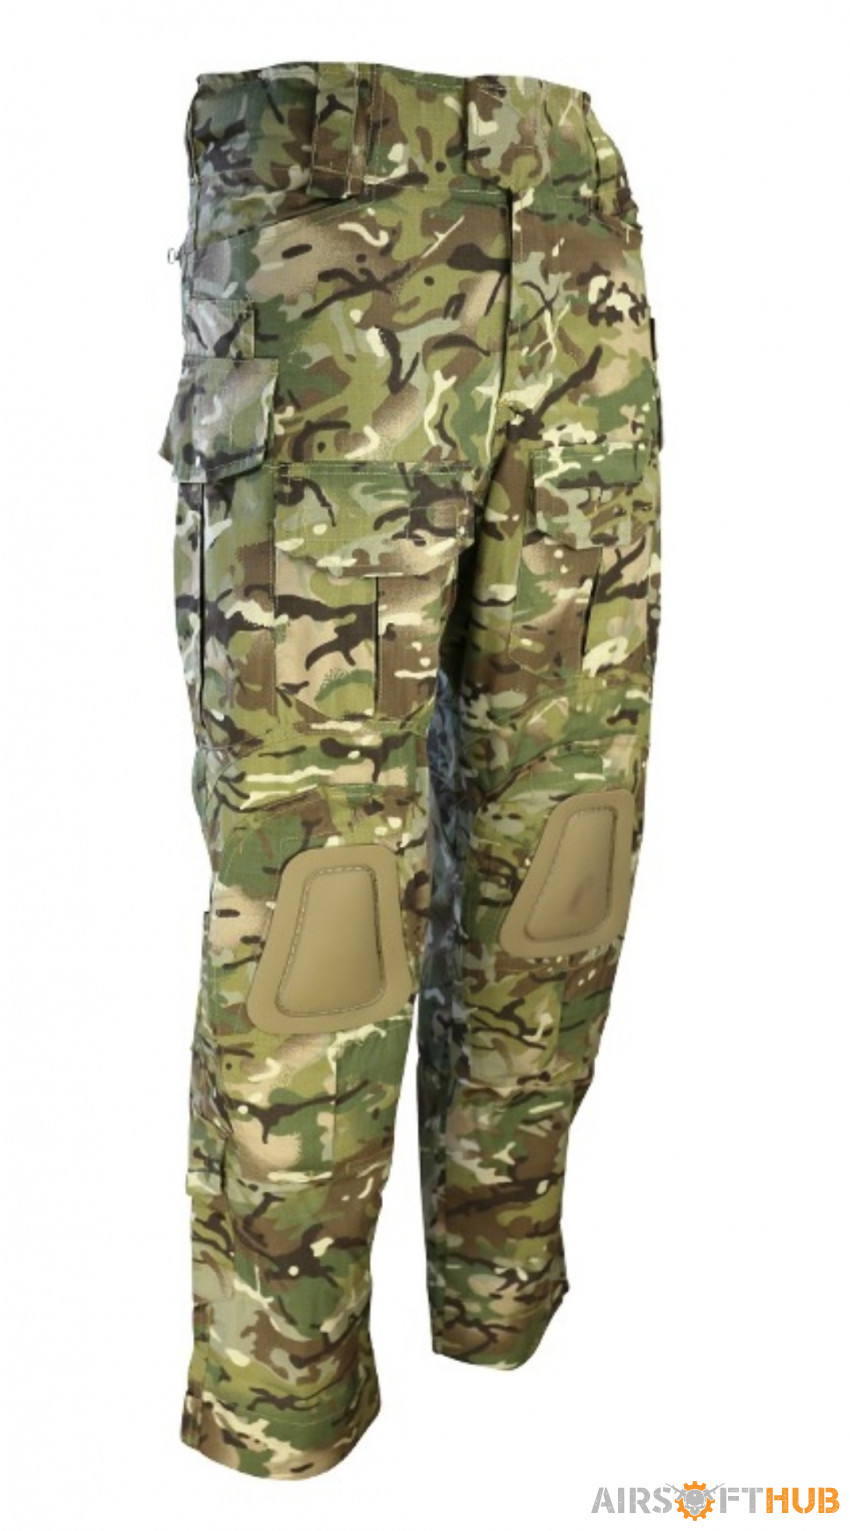 BTP Spec Ops Trousers Knee Pad - Used airsoft equipment